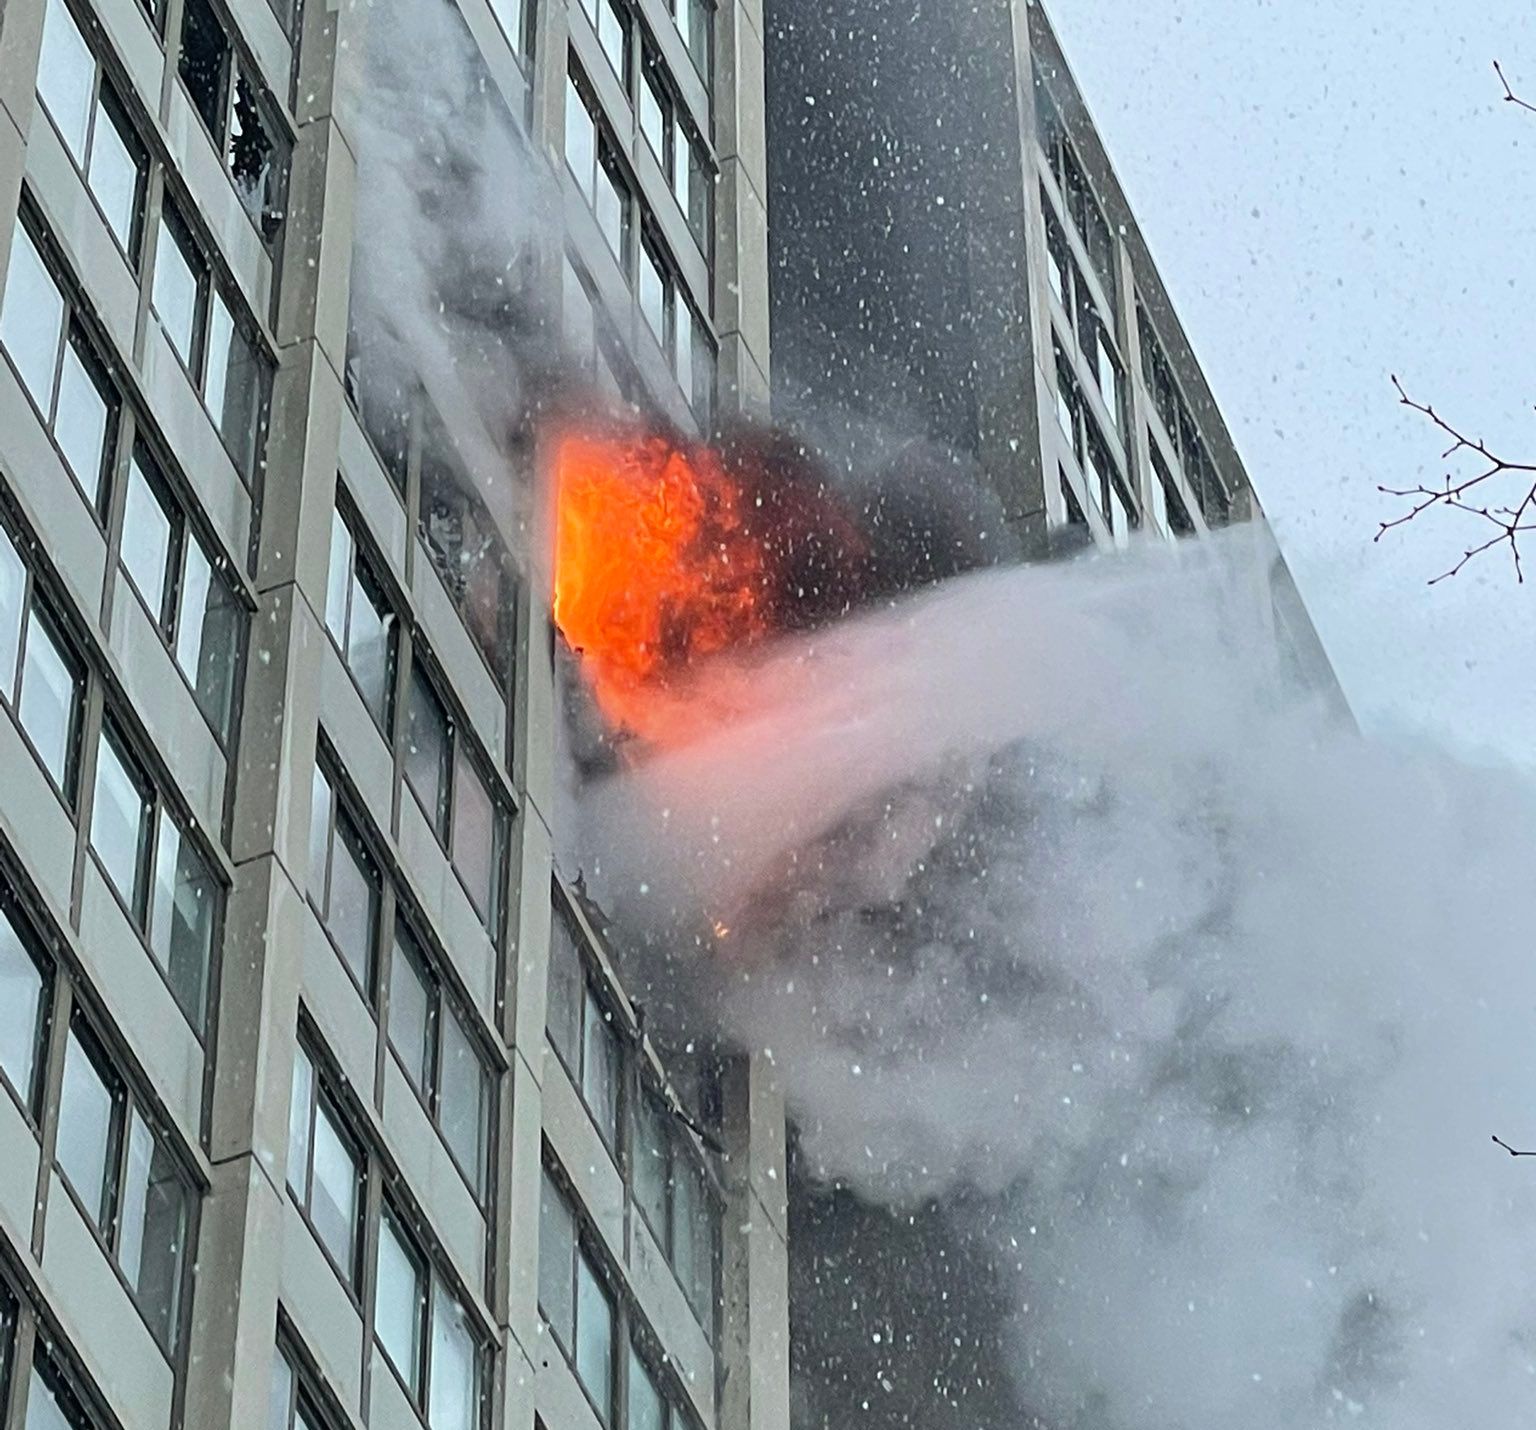 Officials: Deadly Chicago high-rise fire was accidental